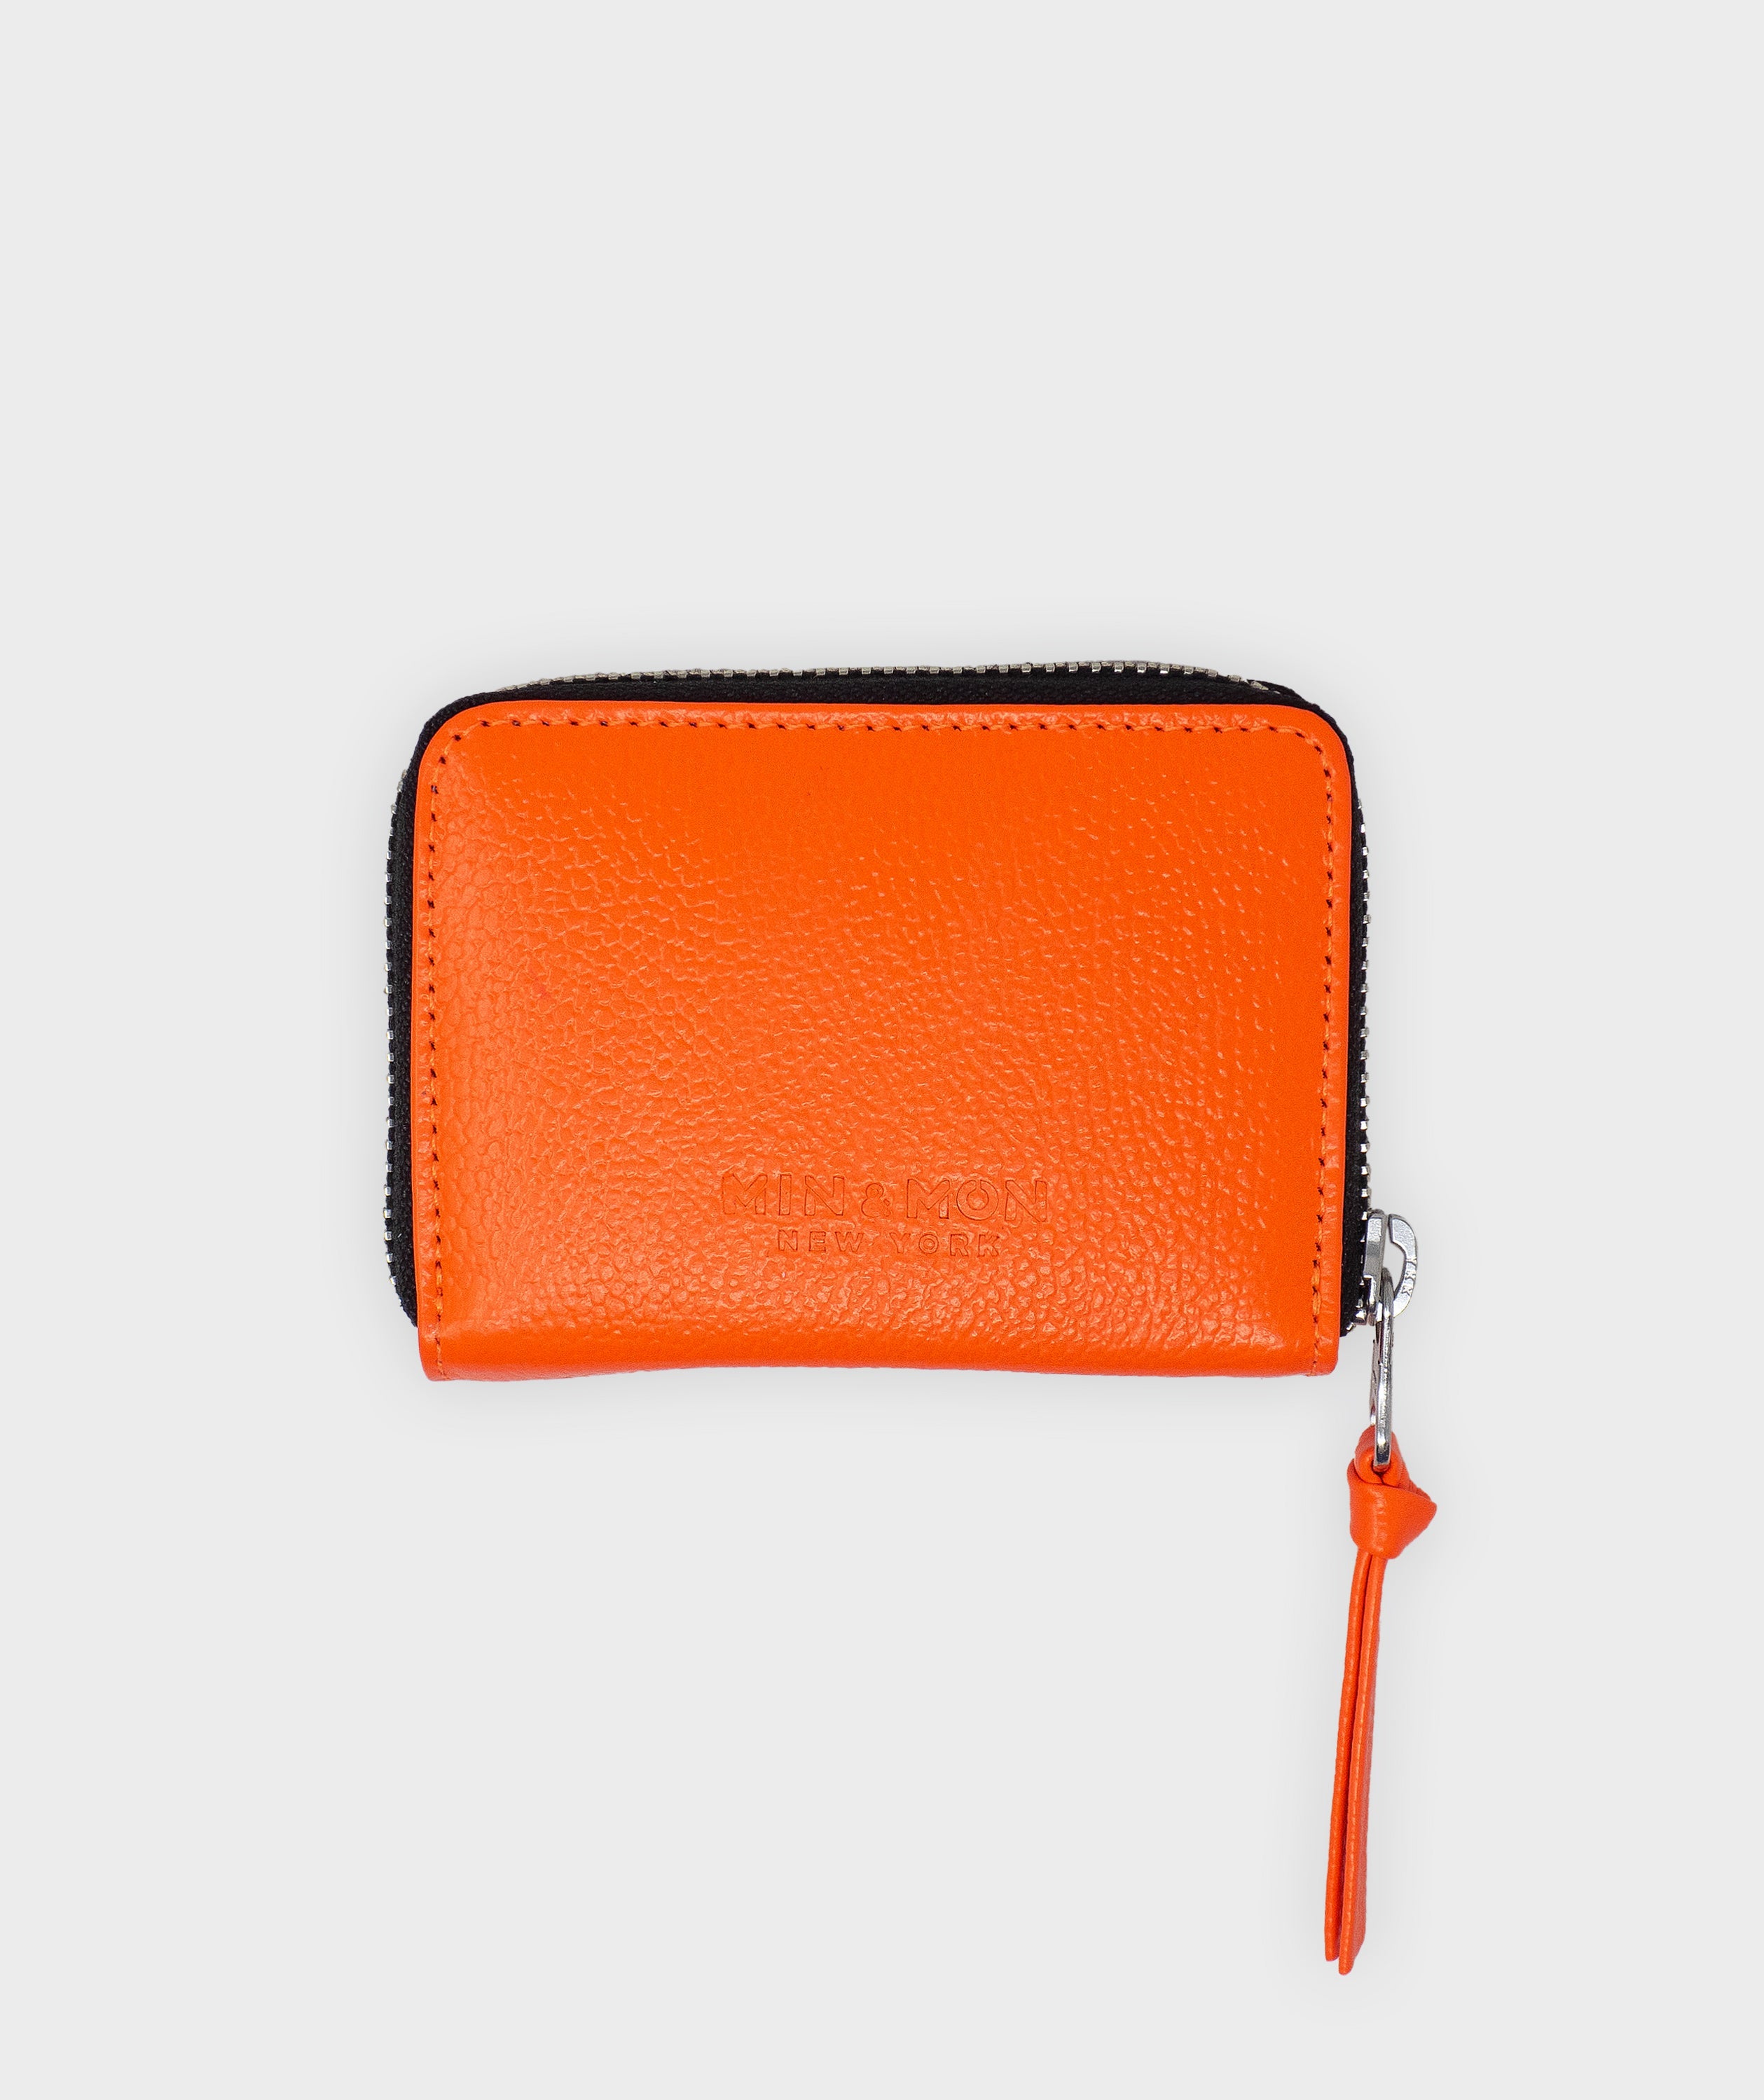 Frodo Neon Orange Leather Wallet - Eyes Embroidery - Back view